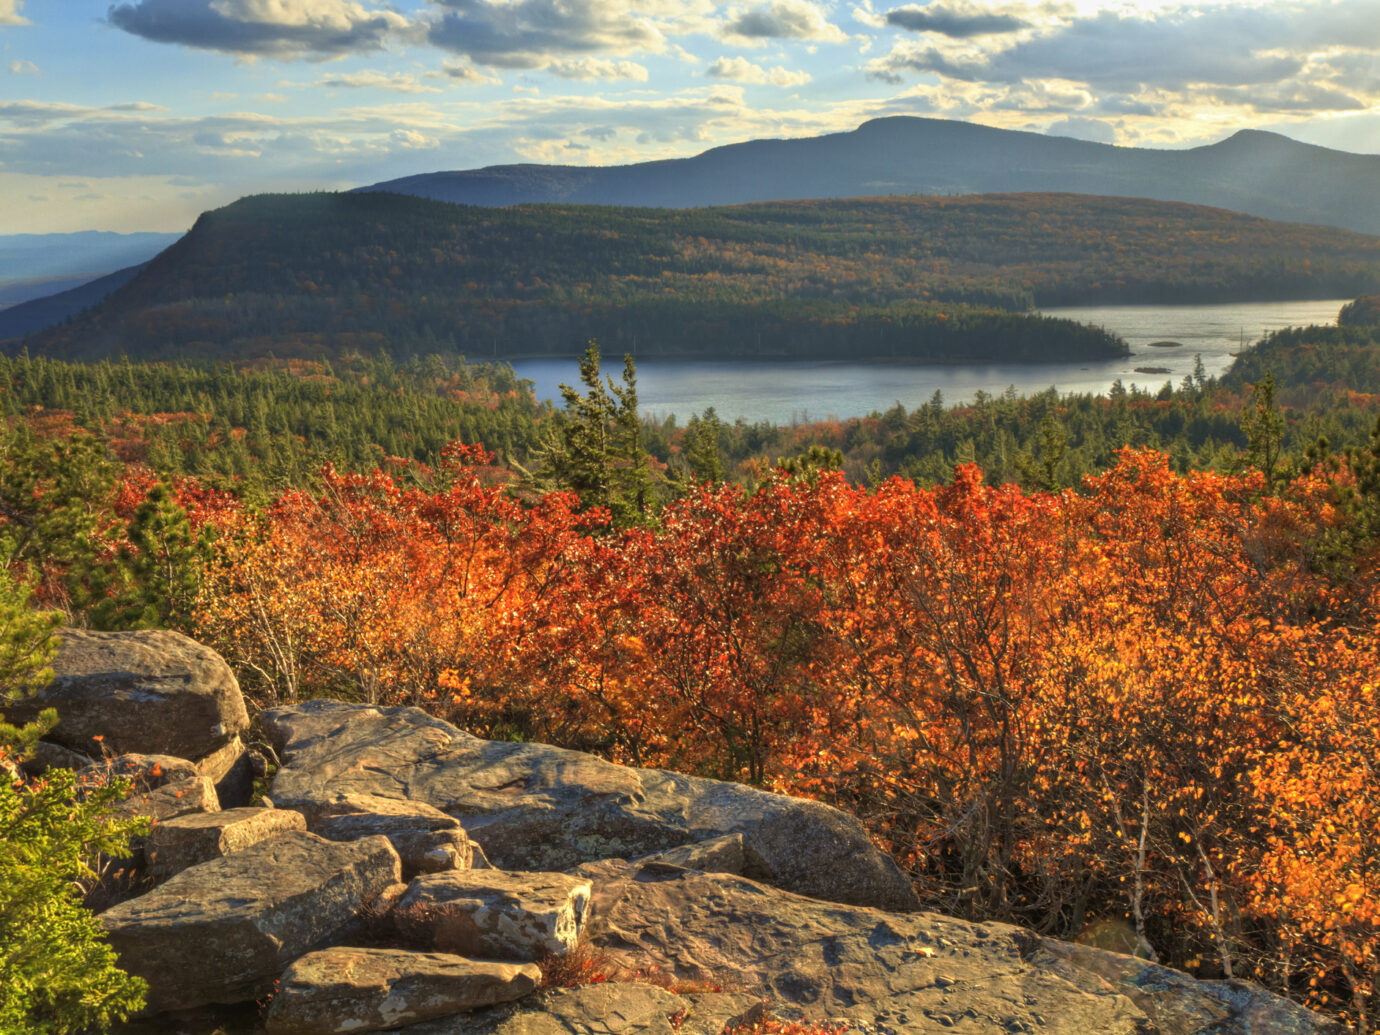 "Afternoon sun on sunset rock in the Autumn, overlooking North-South Lake in the Catskills Mountains of New York.